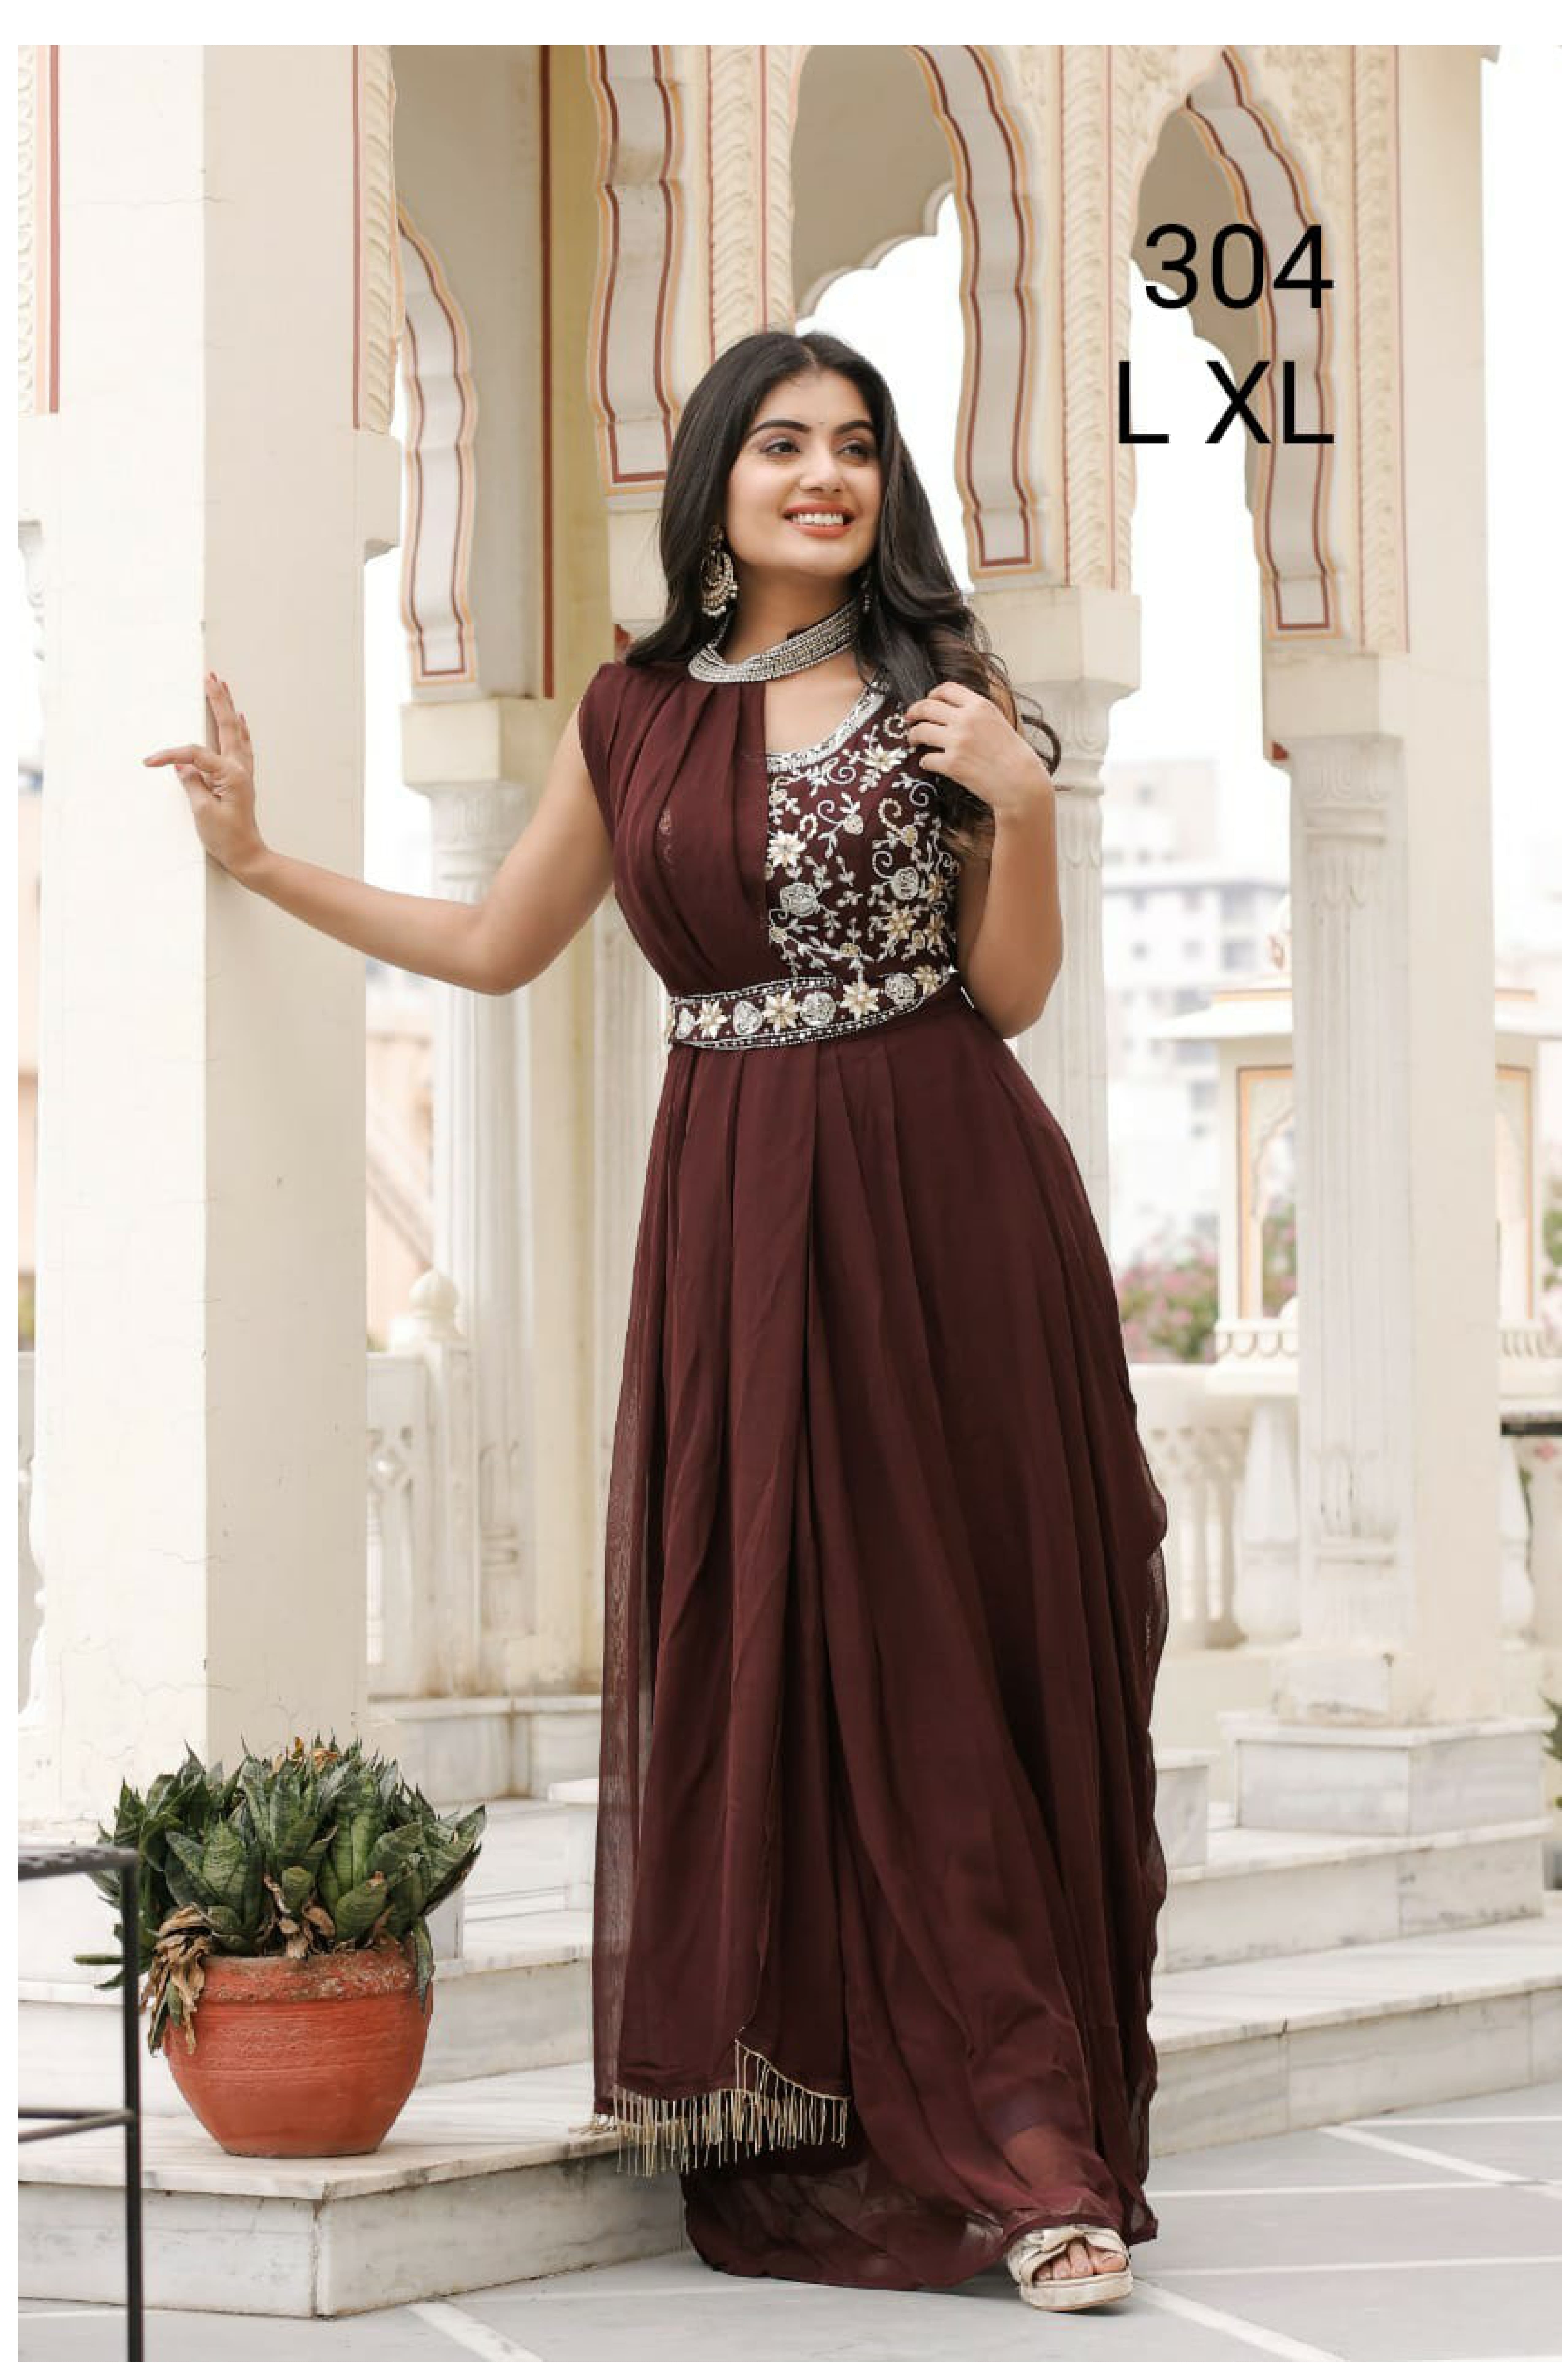 STYLISHTA V 11 11001 TO 11004 PURE CHANDERI SILK DIGITAL PRINTED NEW  READYMADE COOL LOOK ELEGANT TRENDY STYLISH LATEST DESIGNER FANCY PARTY WEAR  SUMMER LONG GOWN WITH SHRUG LATEST DESIGN COLLECTION AT